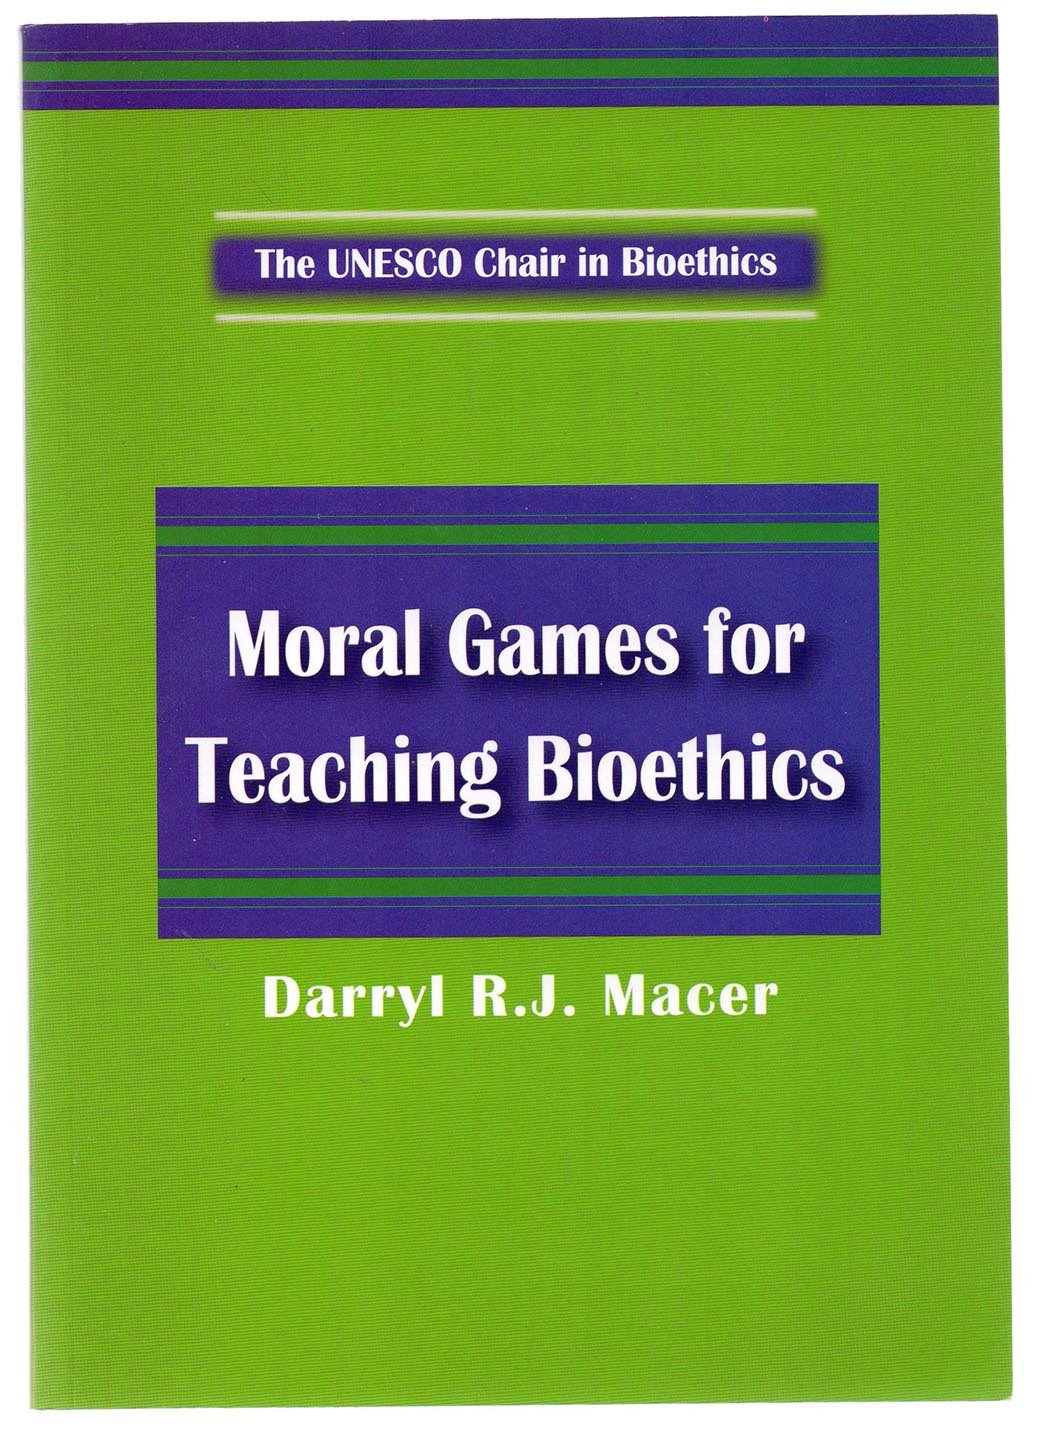 Moral Games for Teaching Bioethics